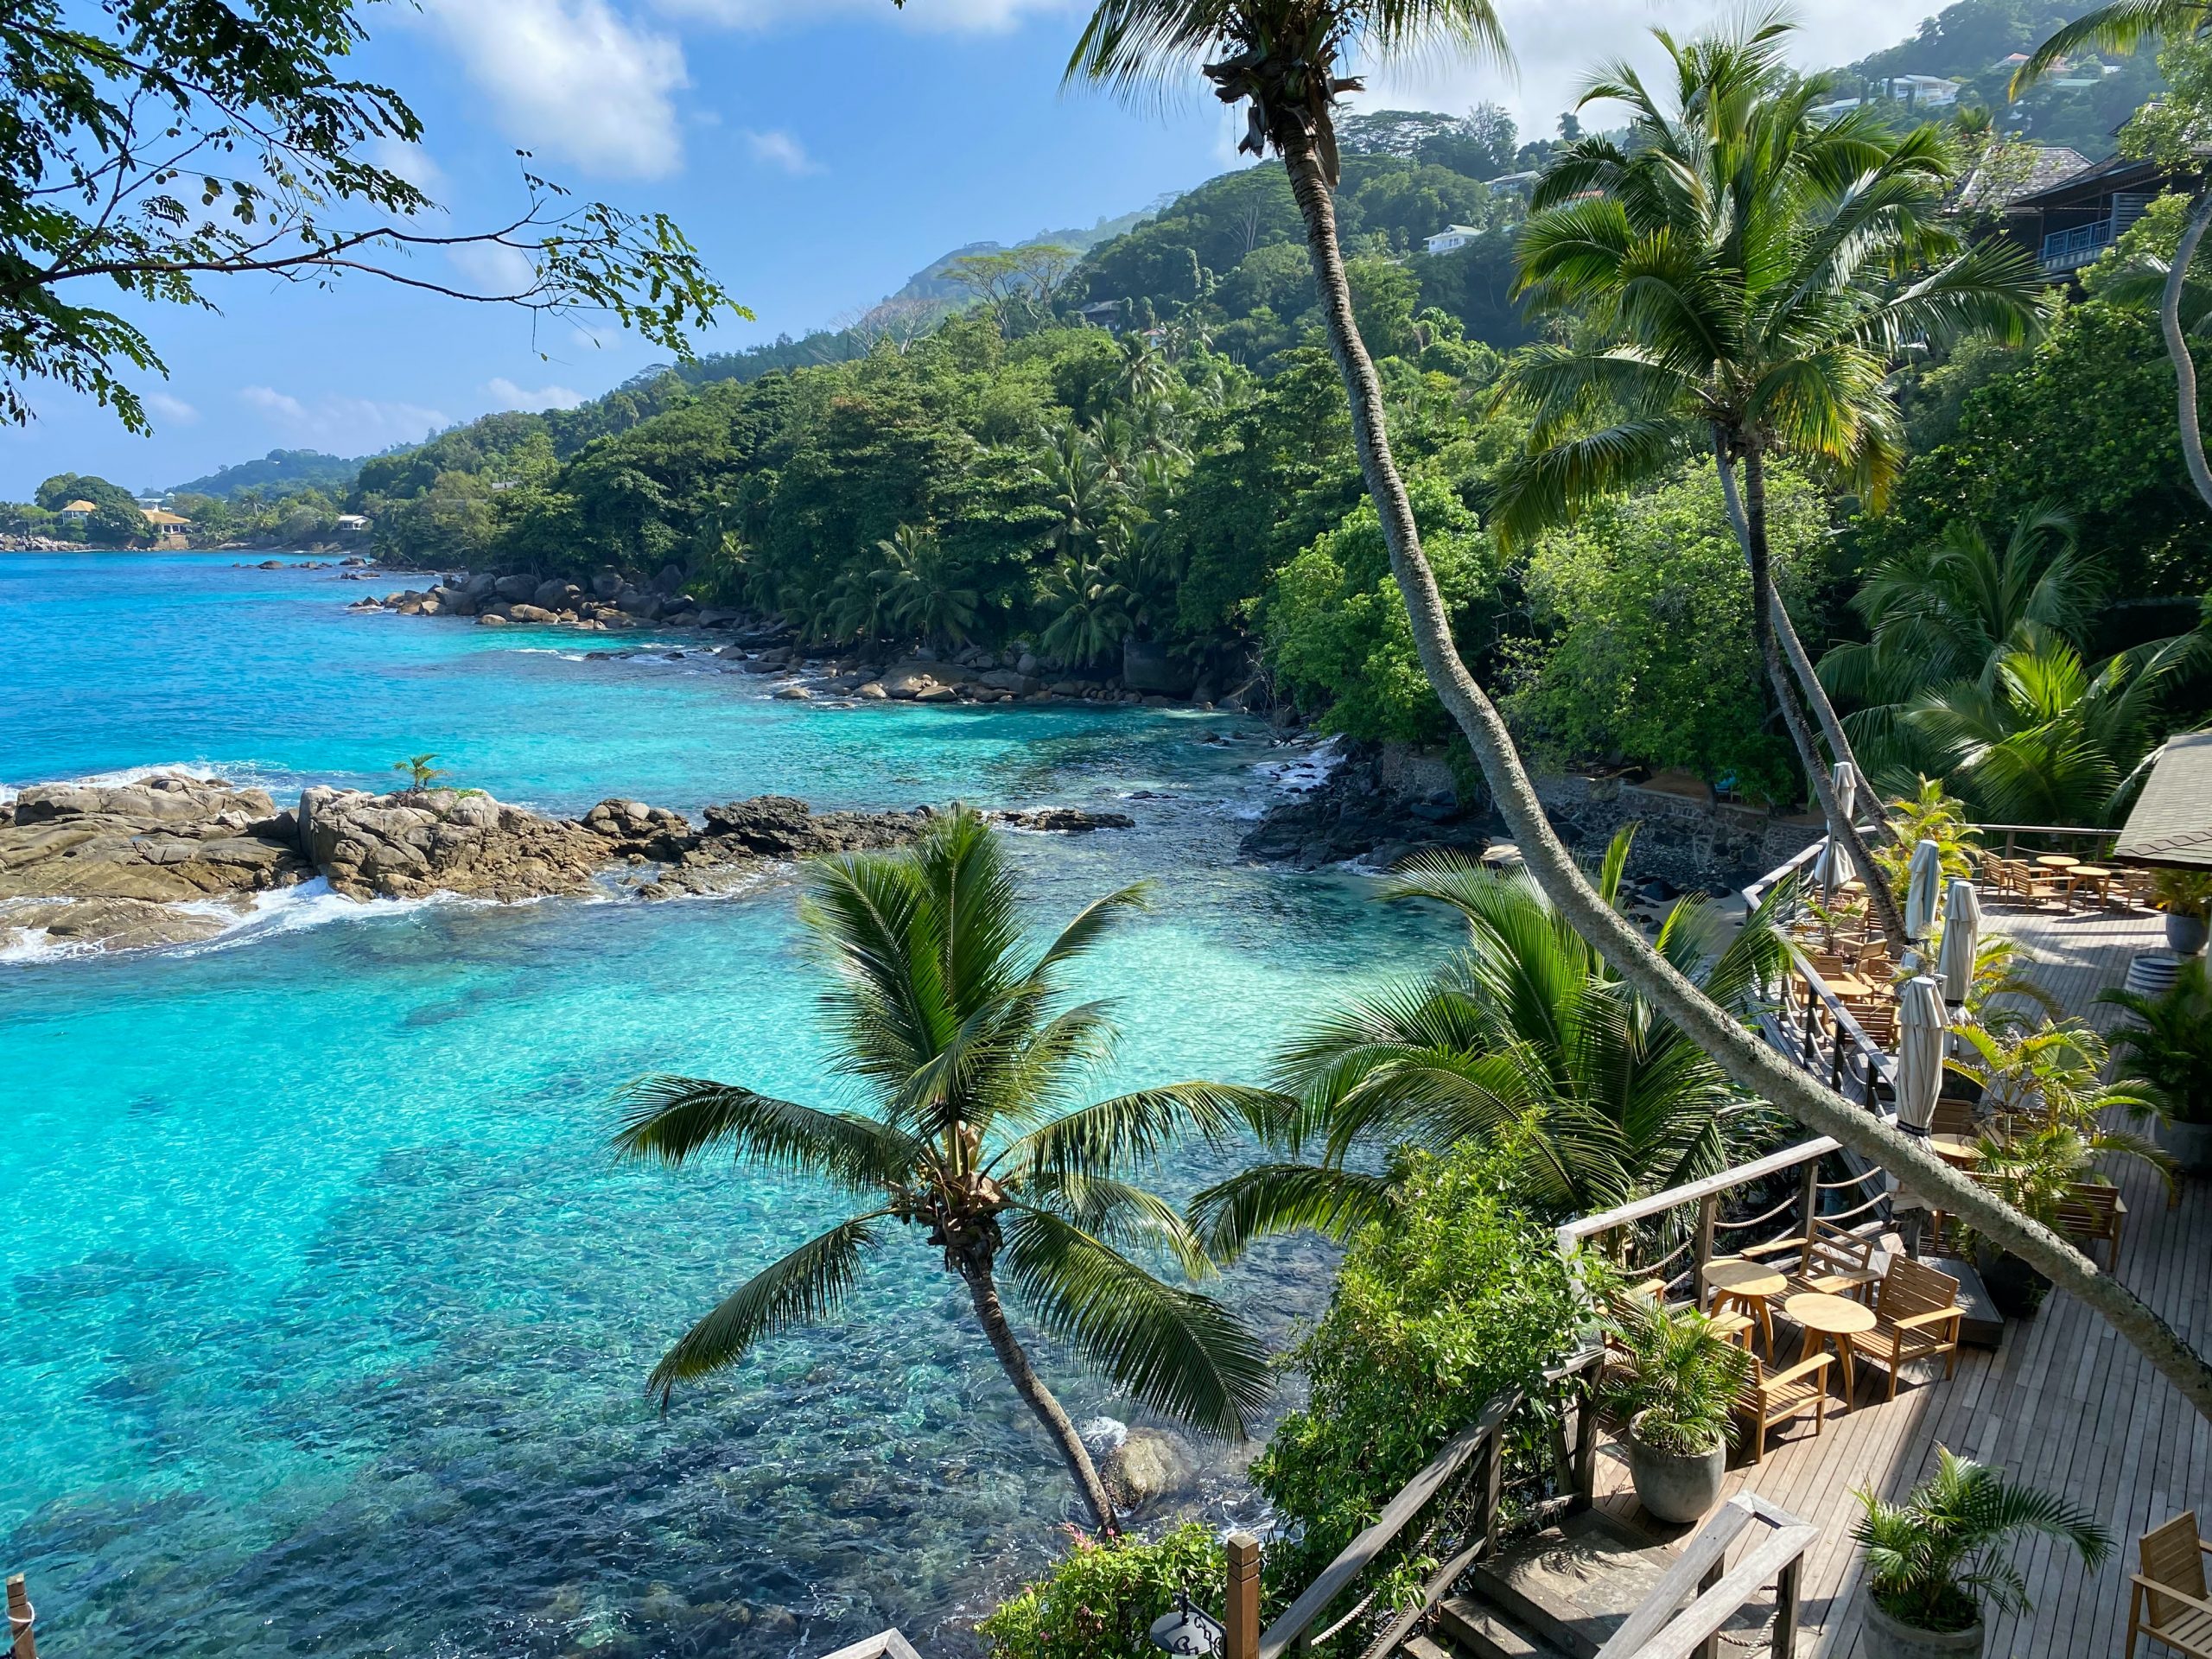 The beautiful Seychelles coastline framed with palm trees.